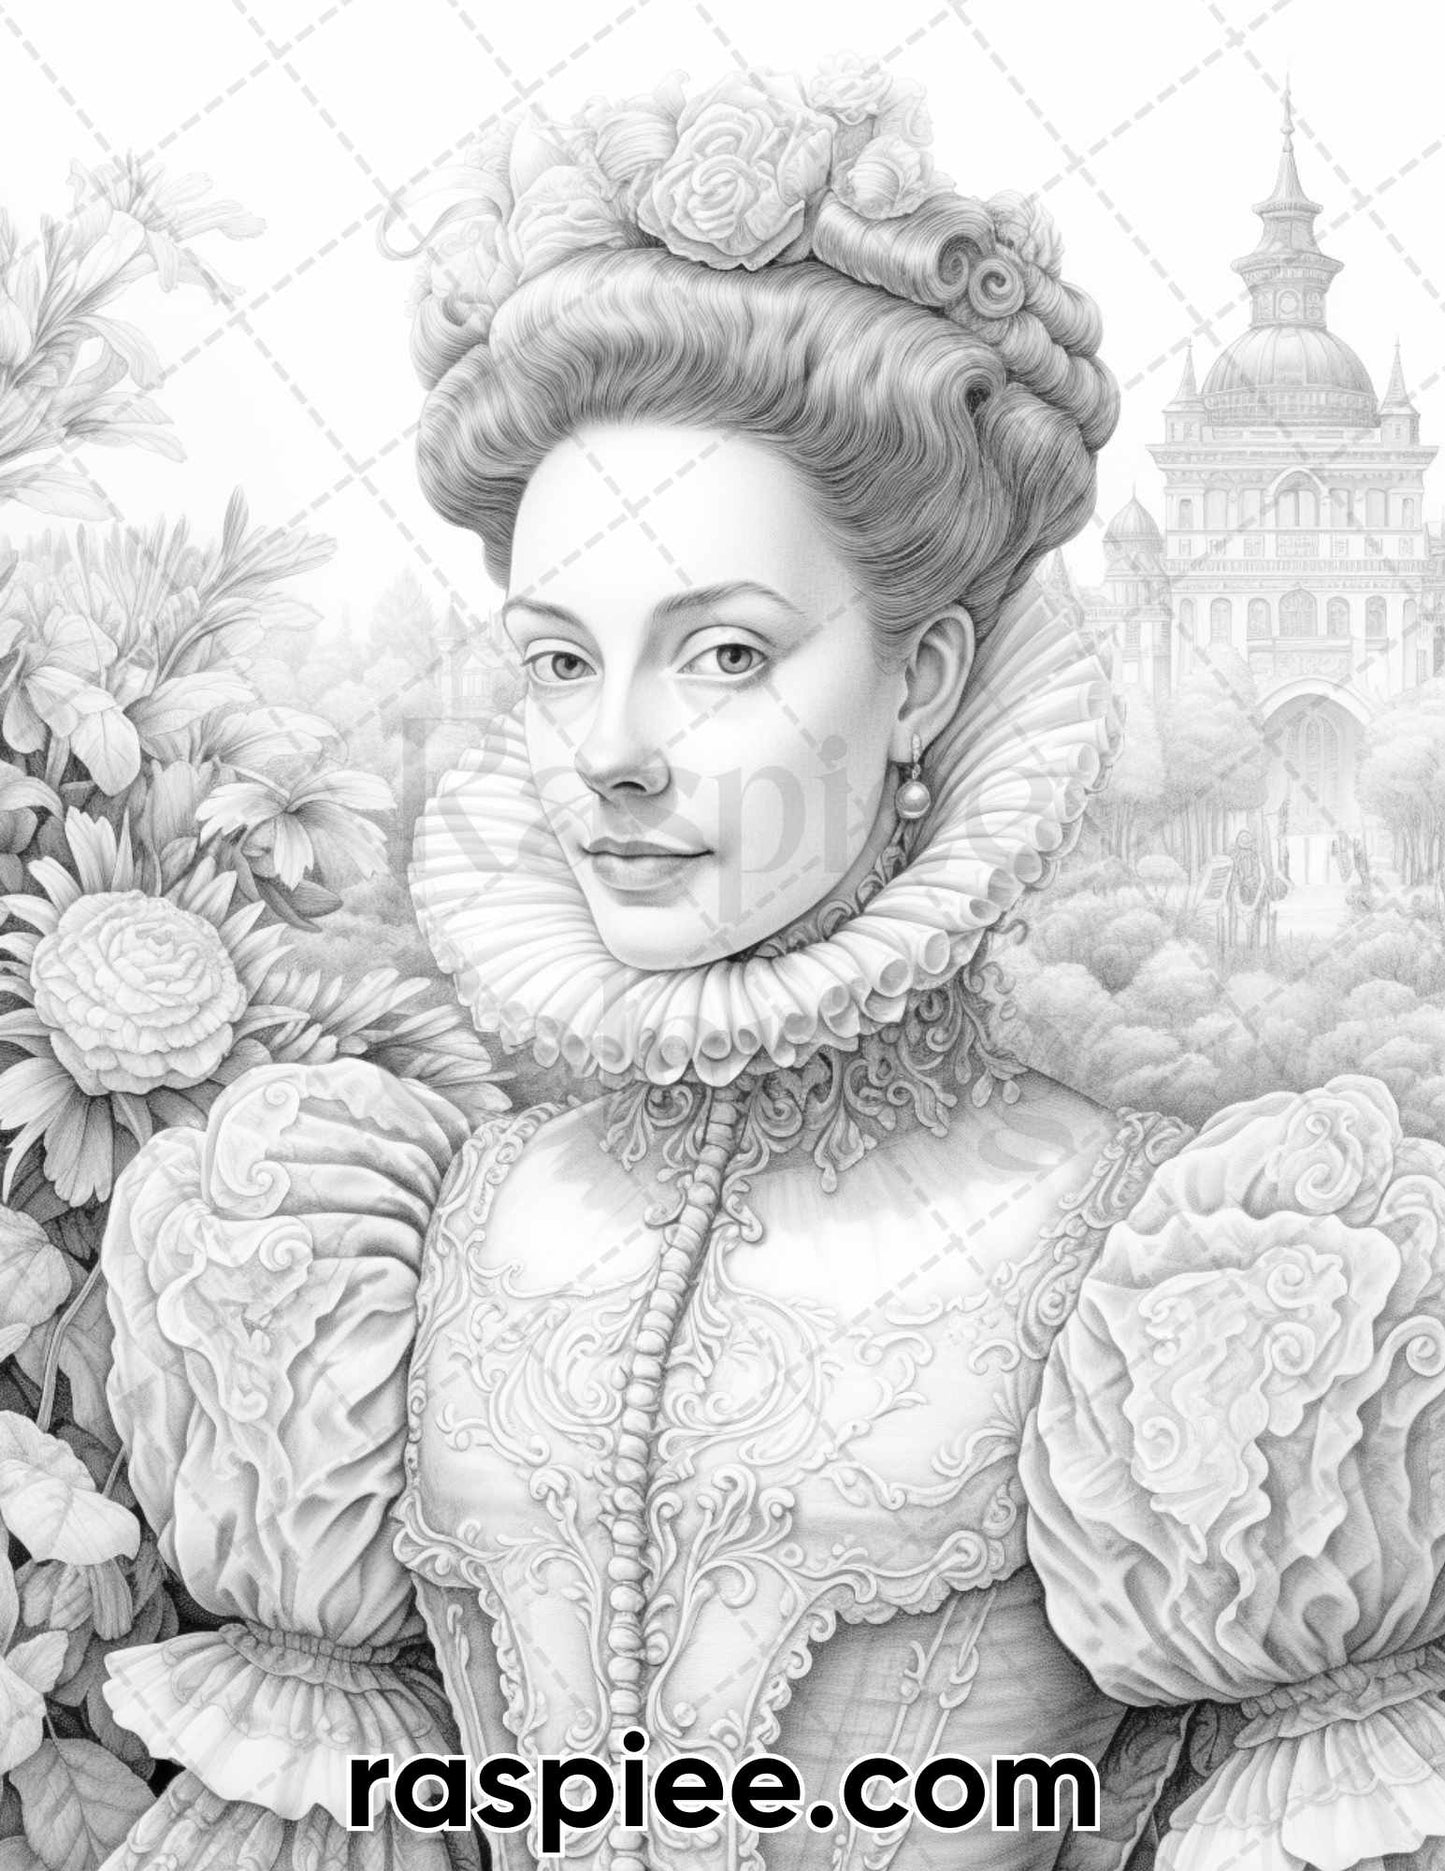 adult coloring pages, adult coloring sheets, adult coloring book pdf, adult coloring book printable, grayscale coloring pages, grayscale coloring books, portrait coloring pages for adults, portrait coloring book pdf, vintage coloring pages, Elizabethan Women Portraits Coloring Pages